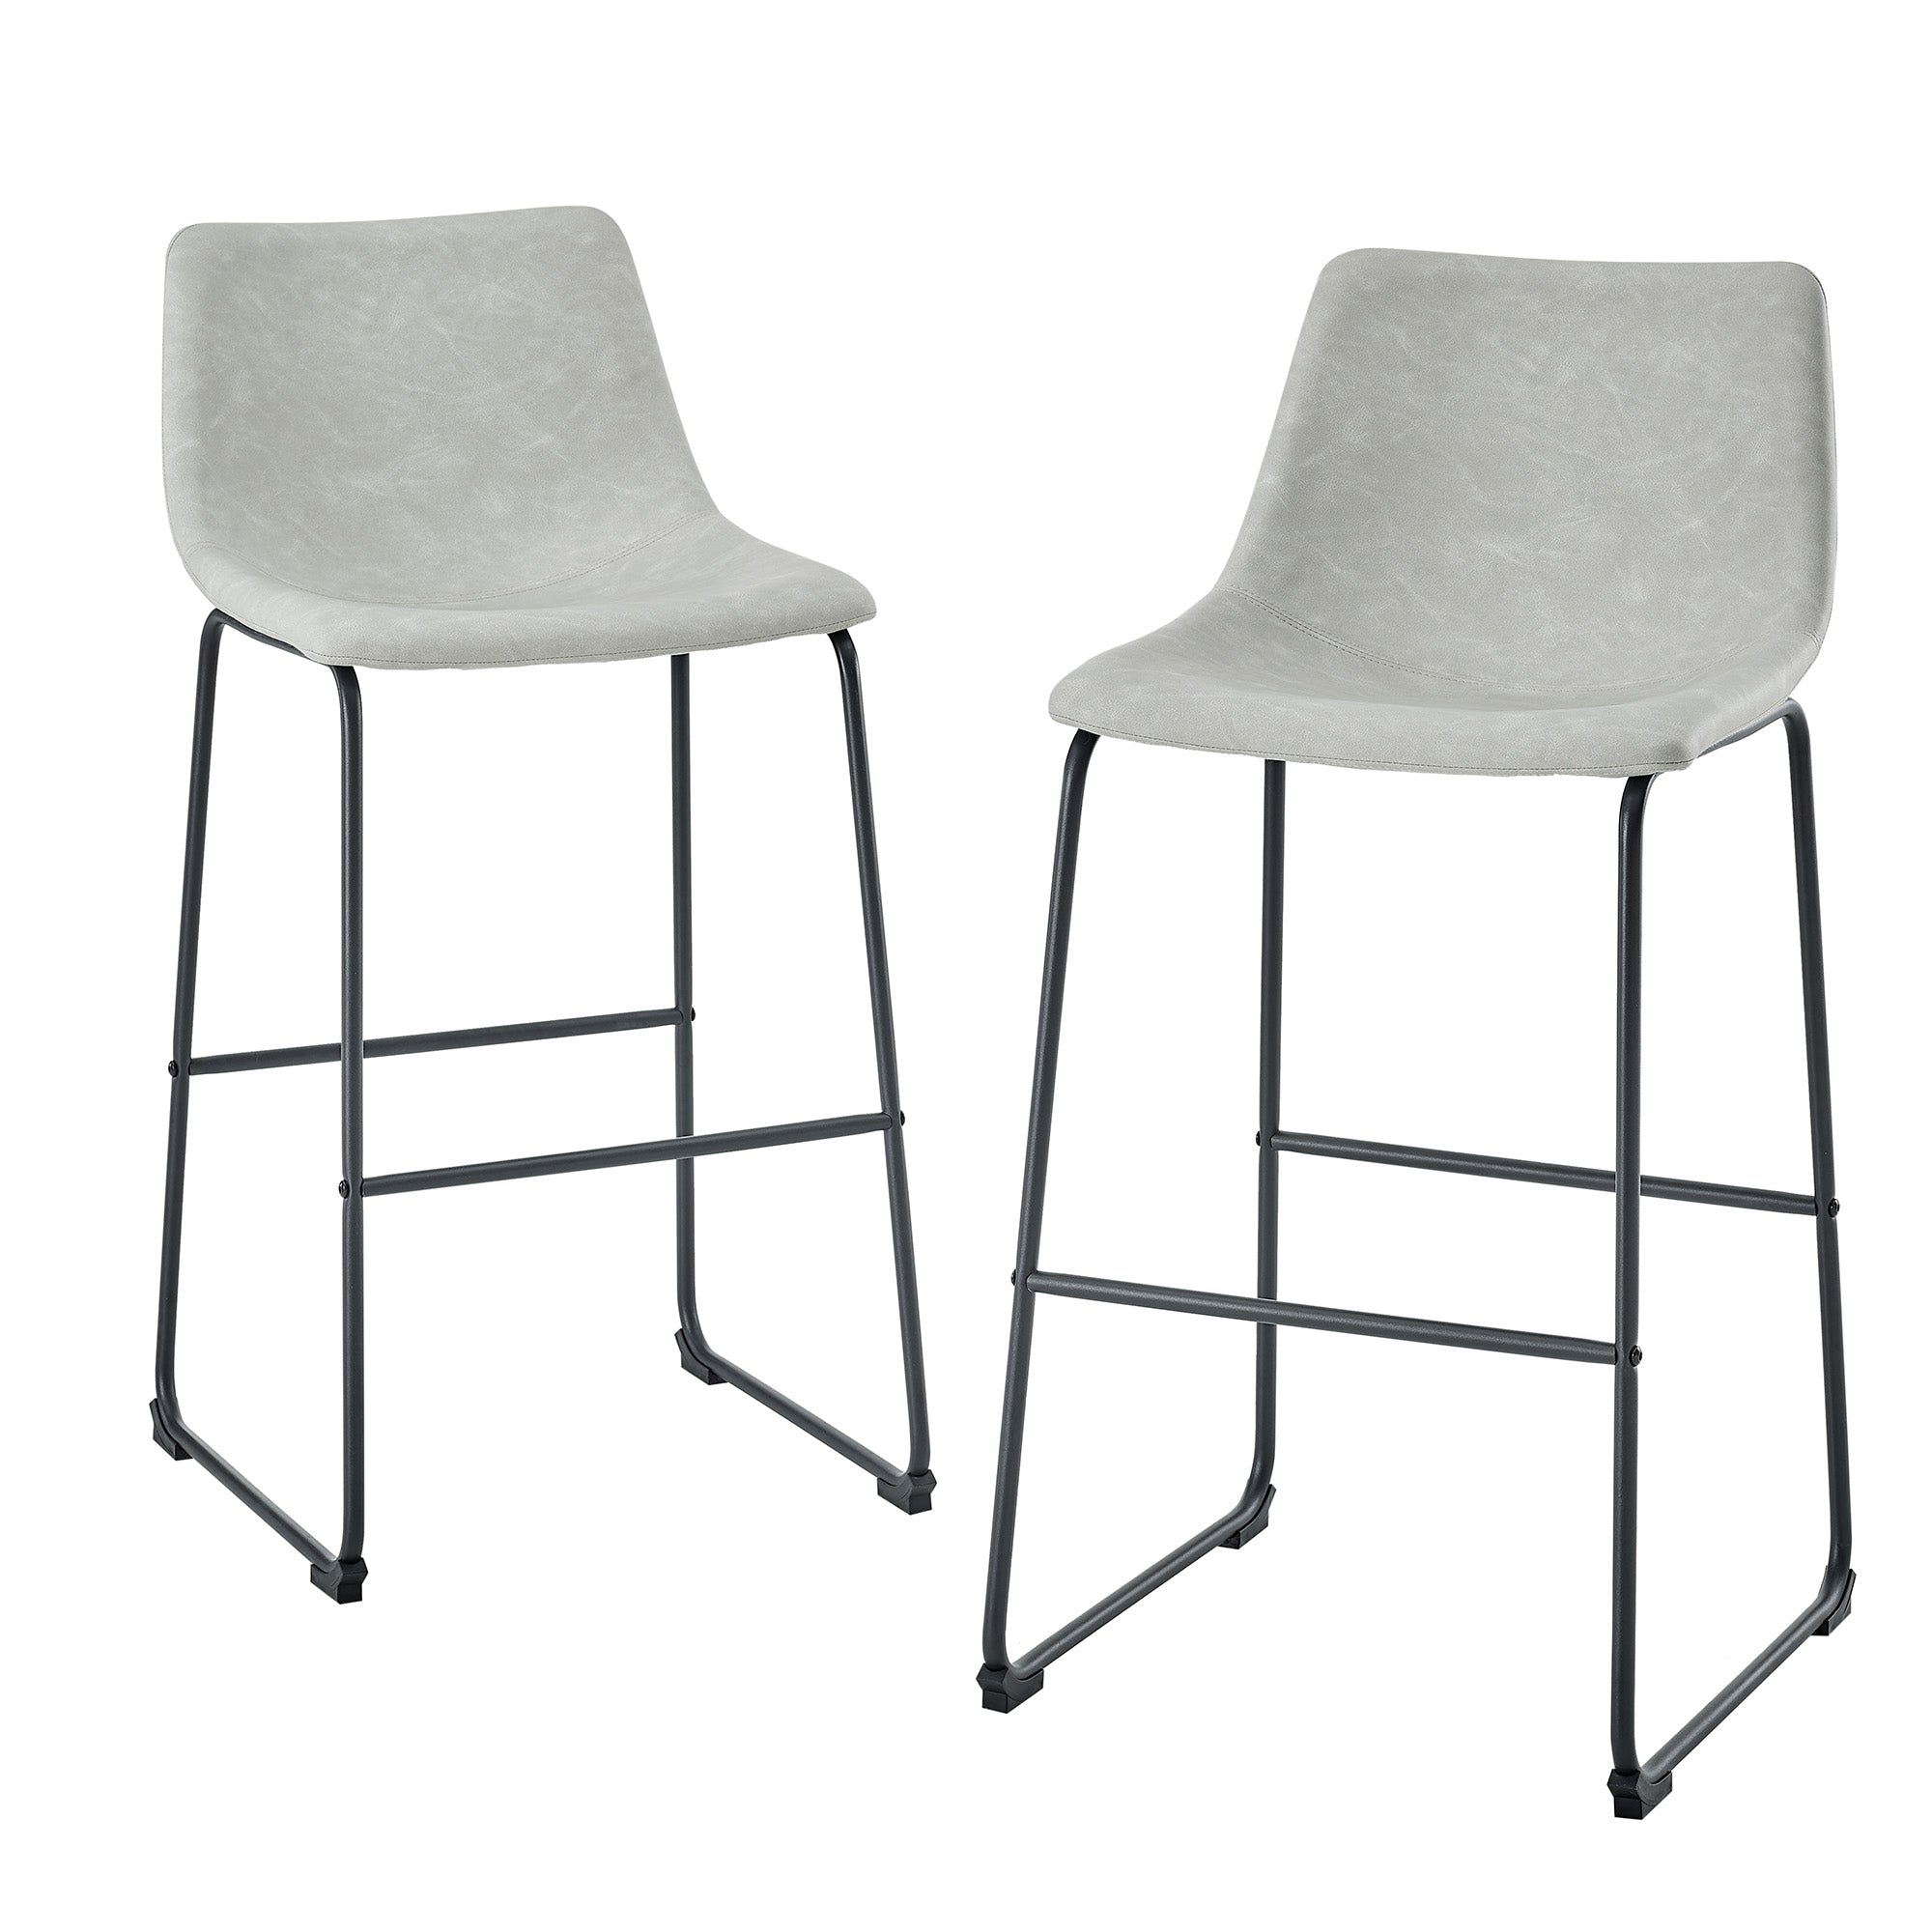 30" Industrial Faux Leather Barstools Set of 2